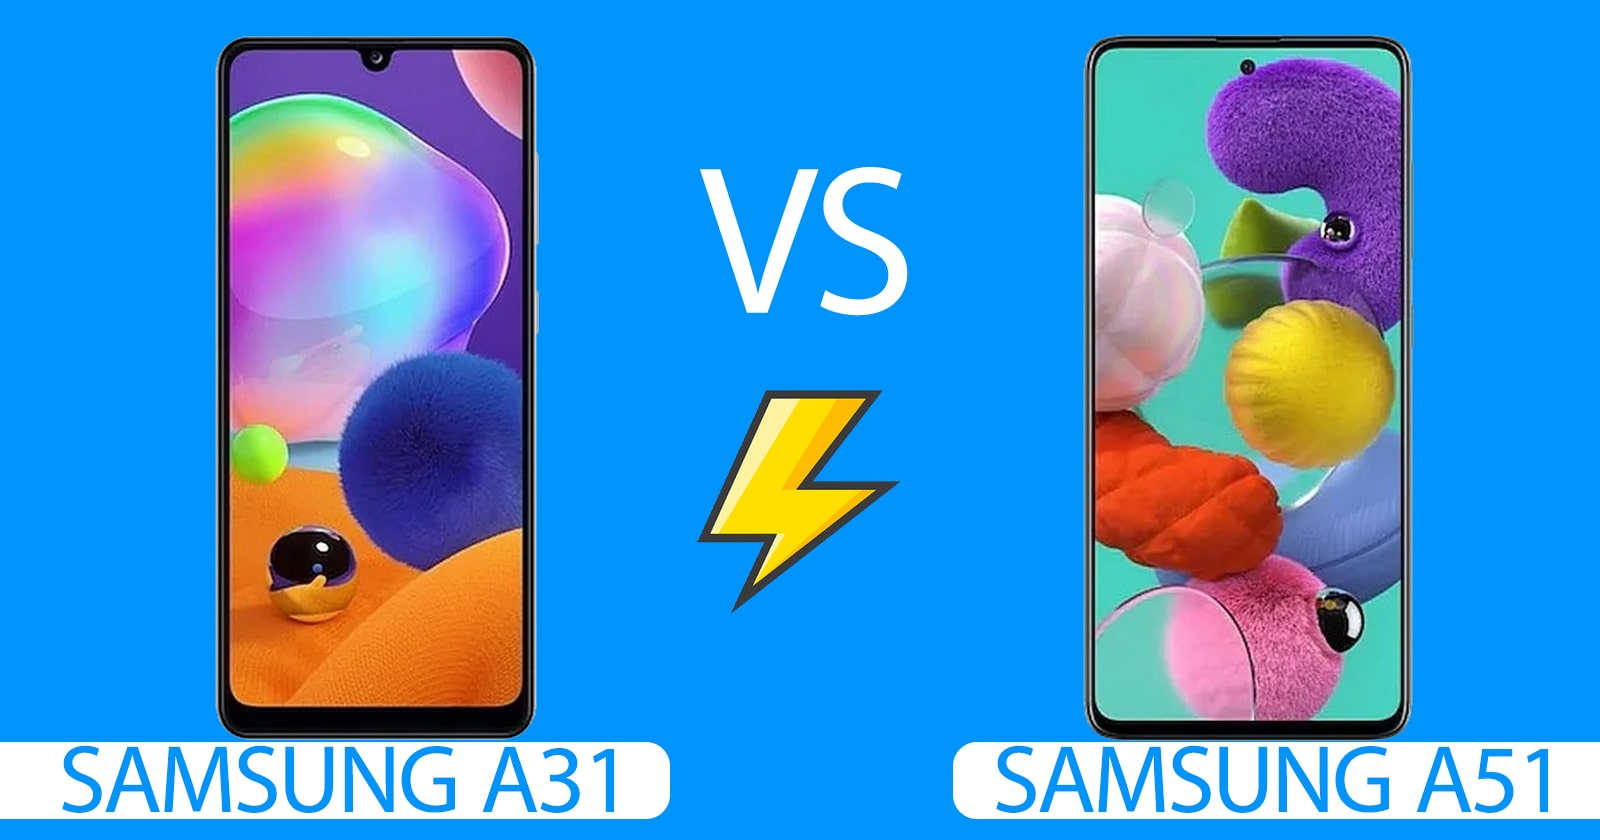 What Is the Difference Between Samsung A31 and A51